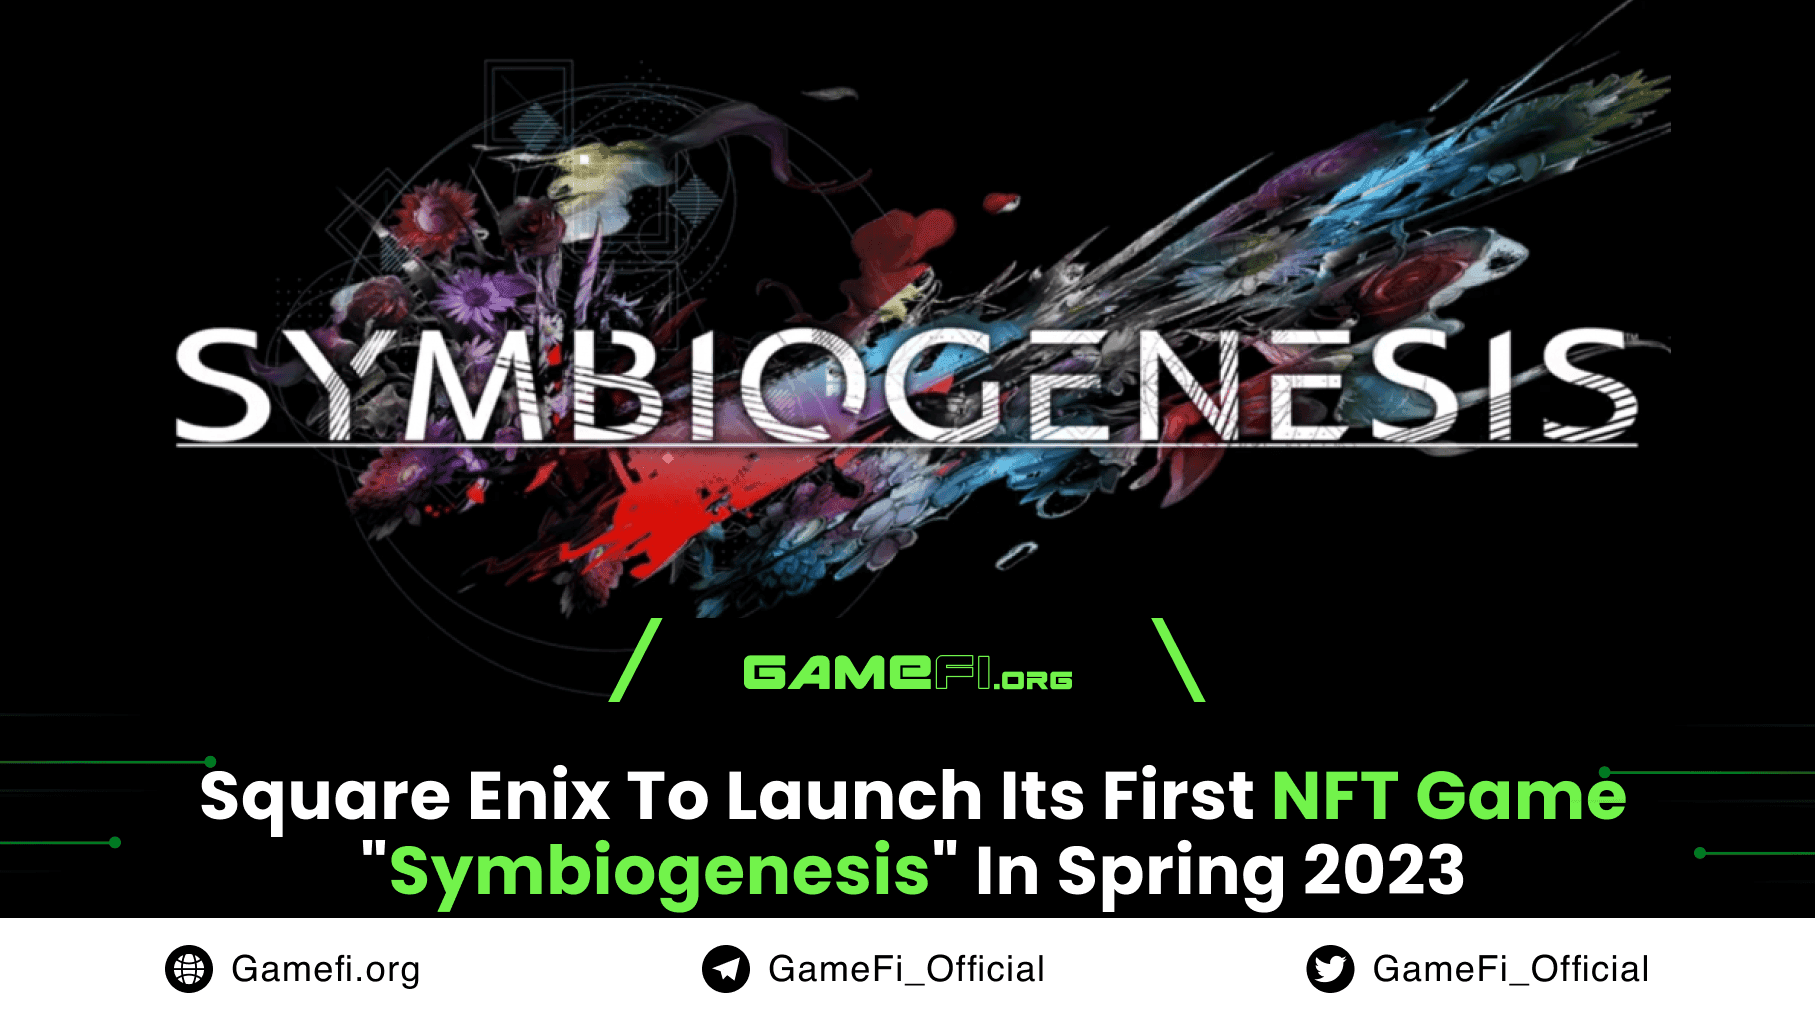 Square Enix to Launch its First NFT Game "Symbiogenesis" in Spring 2023